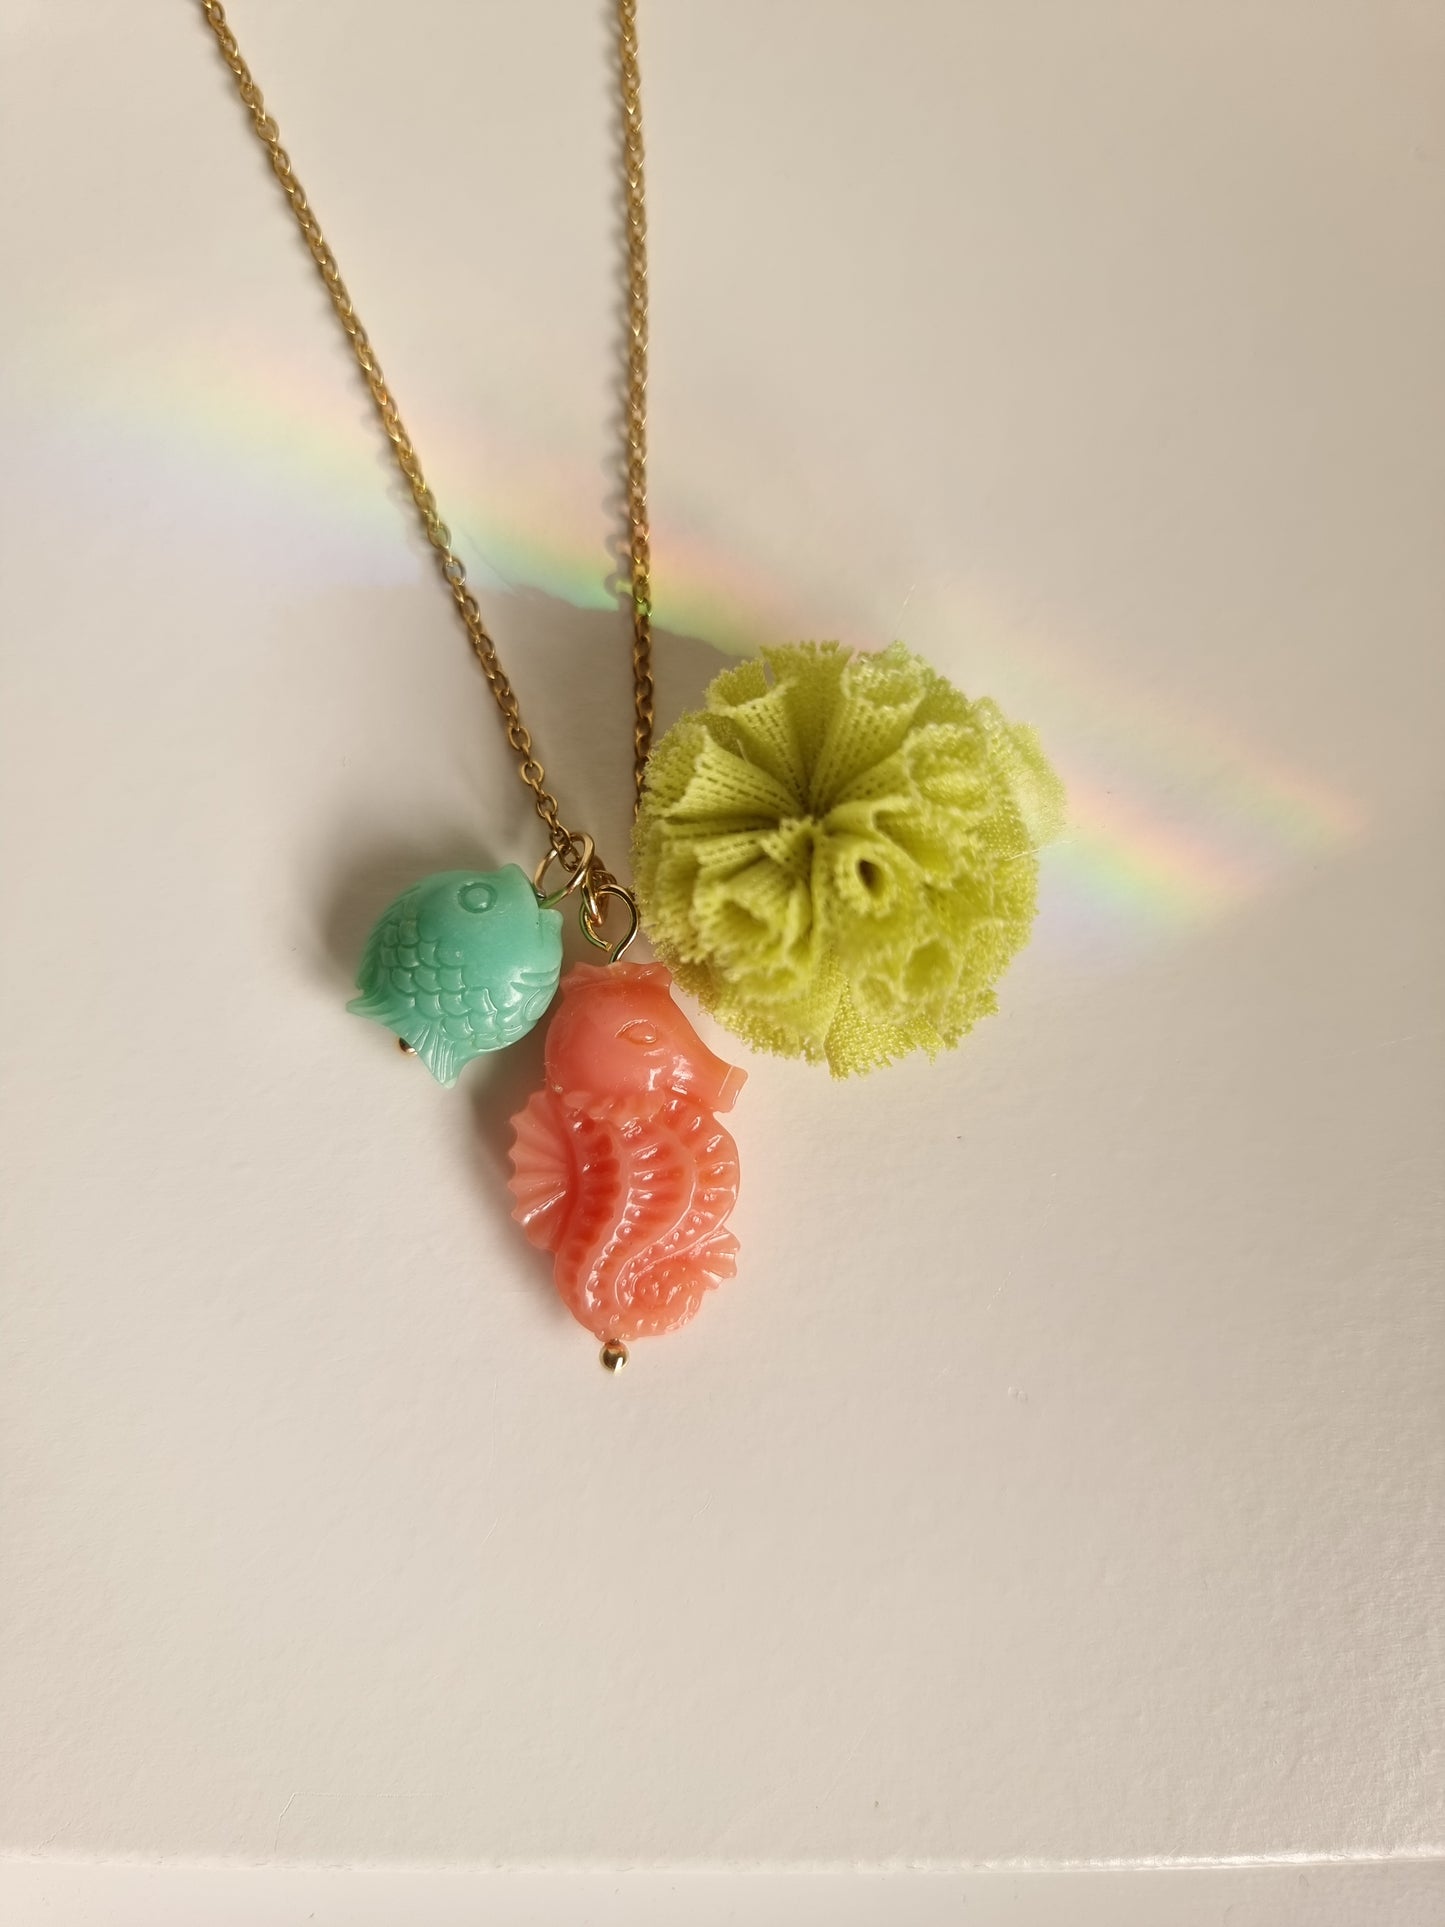 Meri! Seahorse charm necklace with green pompom